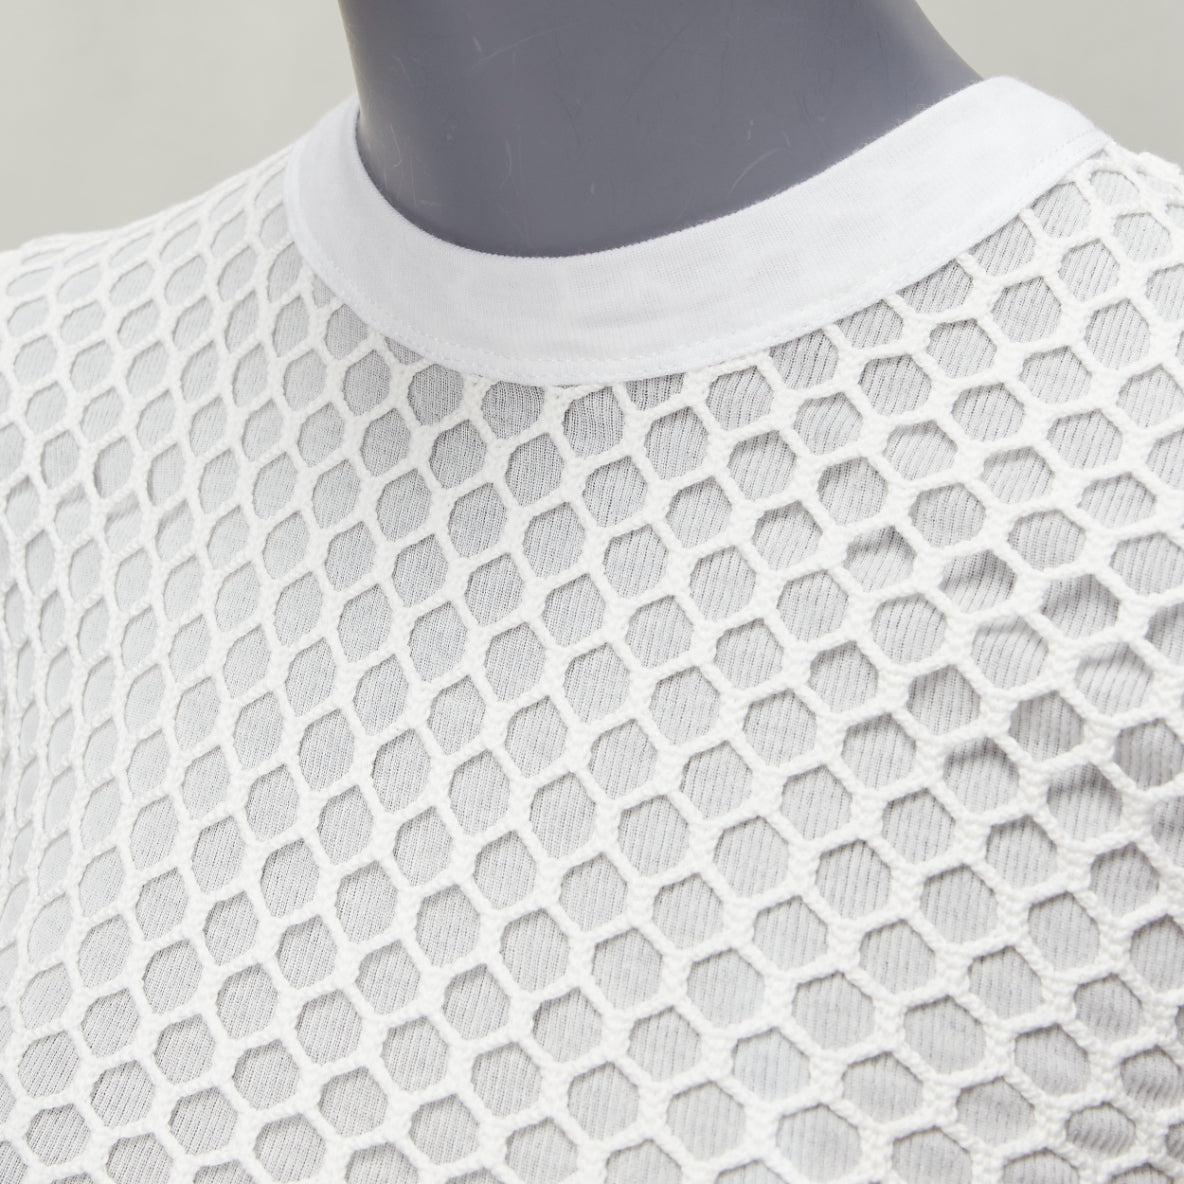 T ALEXANDER WANG white cotton net overlay crew neck fitted top XS
Reference: AAWC/A00748
Brand: T Alexander Wang
Material: Cotton
Color: White
Pattern: Solid
Closure: Pullover
Lining: White Cotton
Extra Details: Logo at back.
Made in: